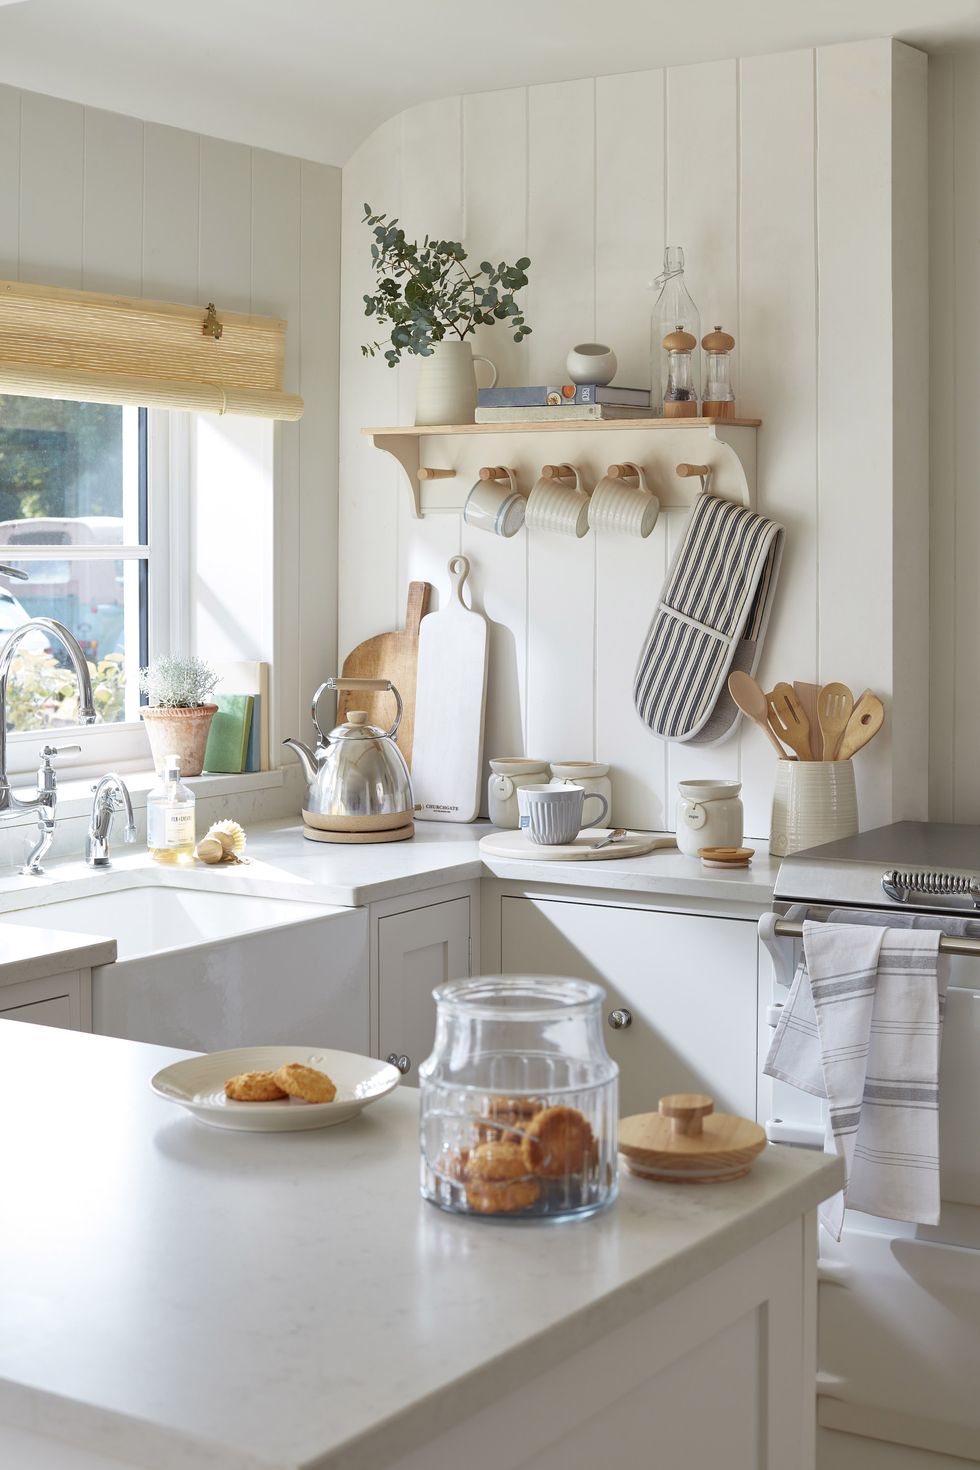 6 Simple Ways To Create A Cosy Kitchen - Olive & Barr